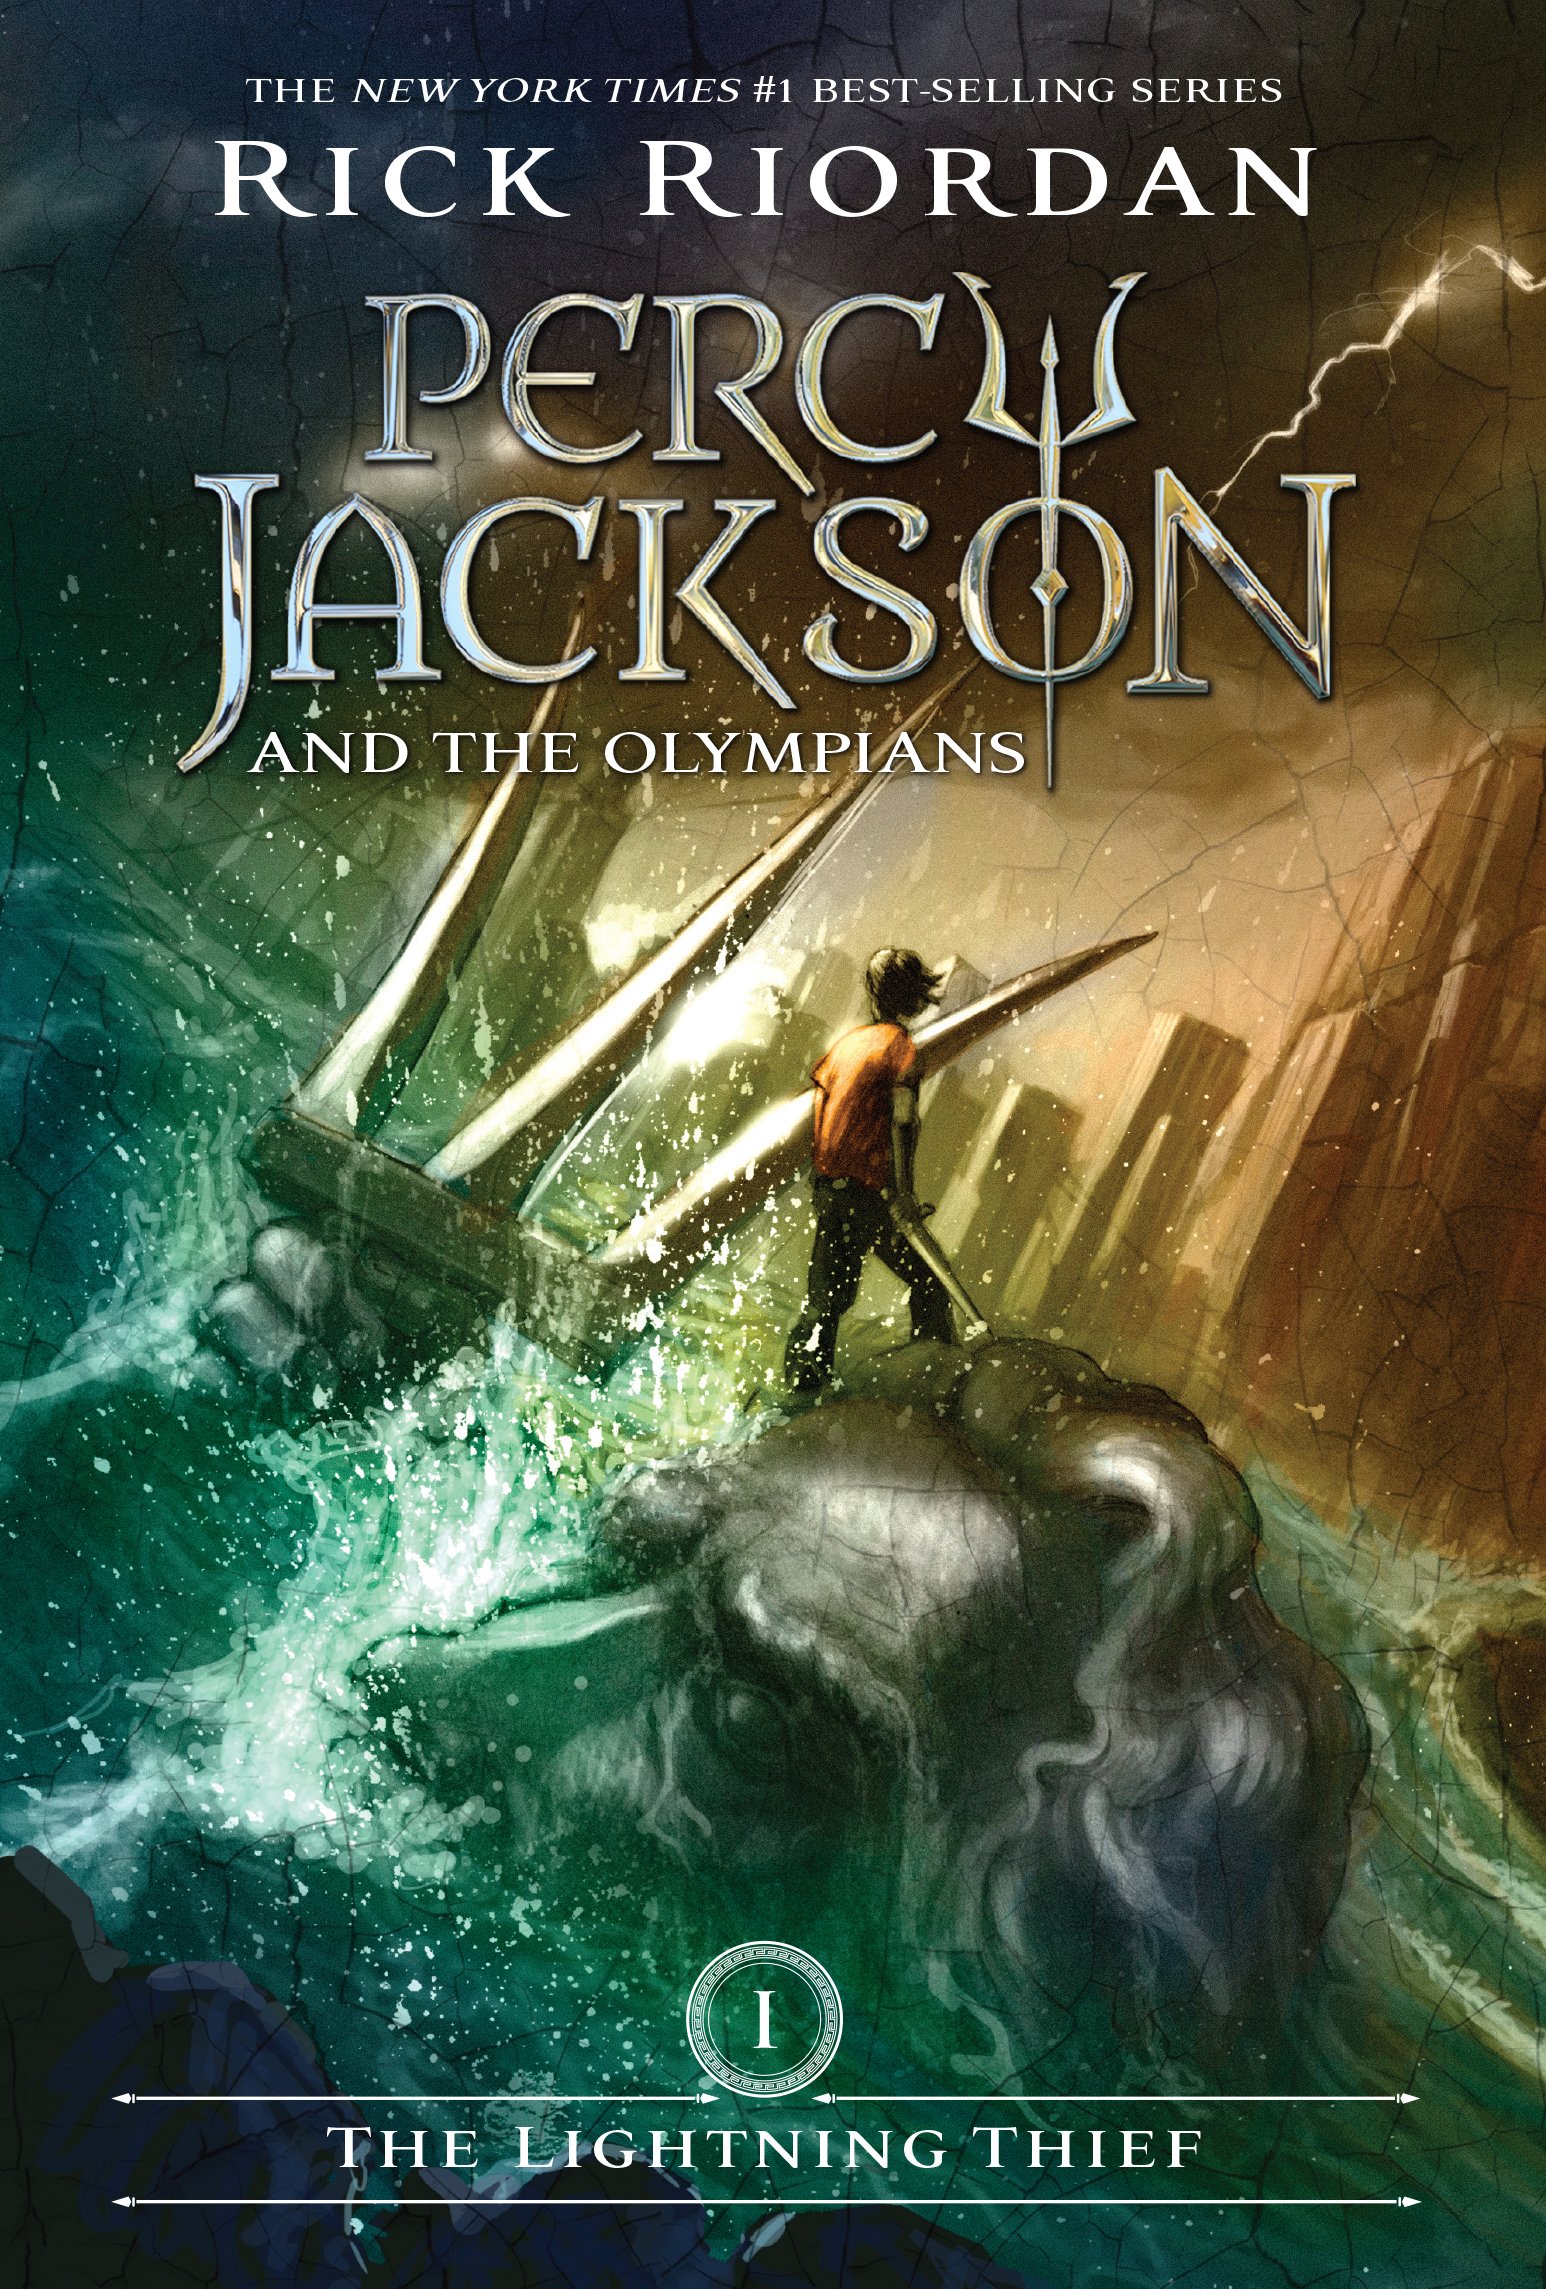 Percy Jackson & The Olympians: The Lightning Thief Backgrounds on Wallpapers Vista